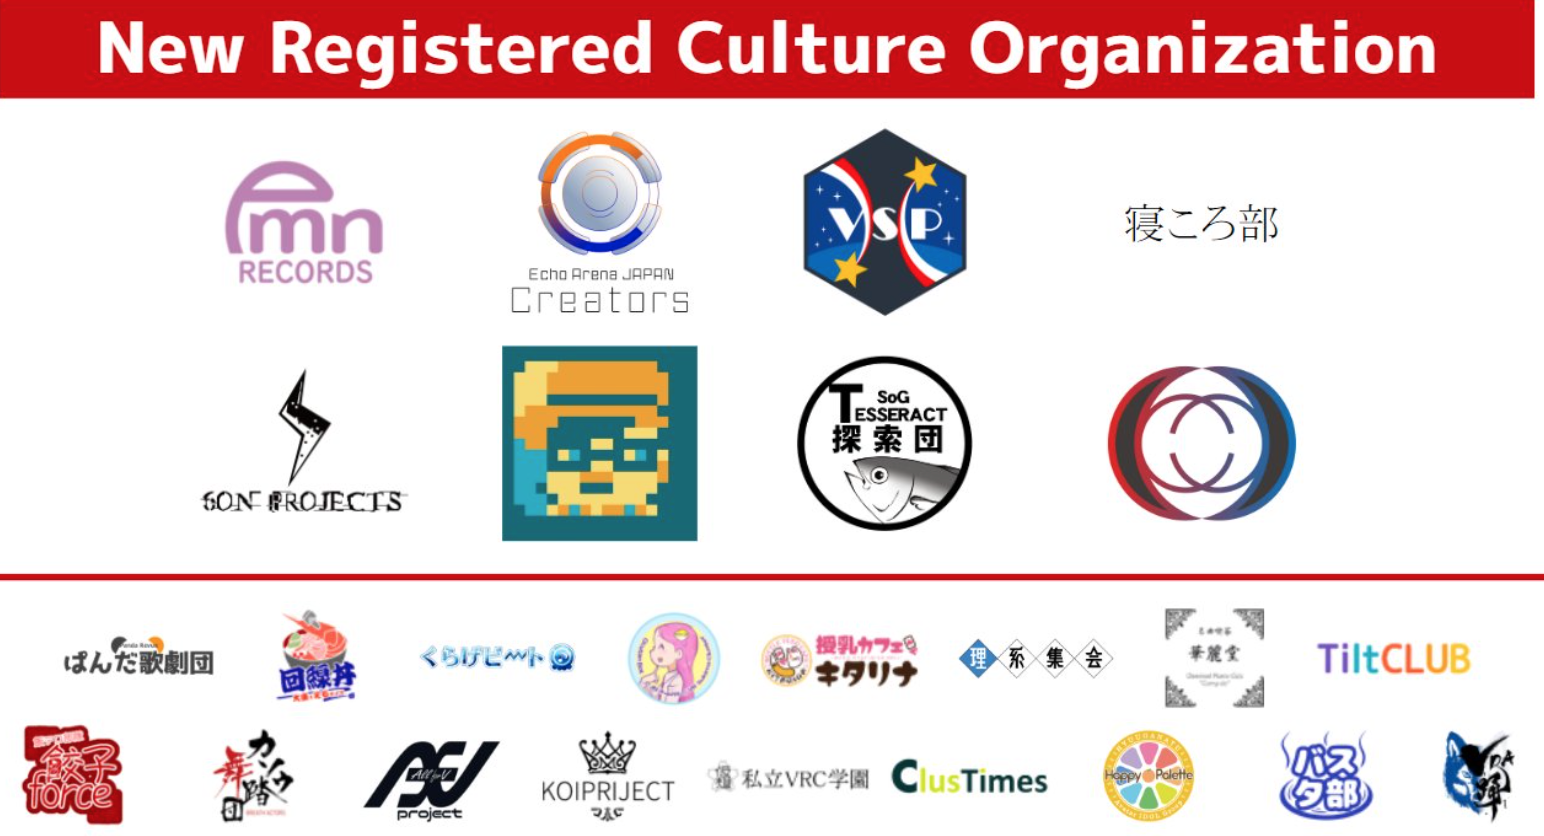 Registered as a cultural organization with the NPO Virtual Rights